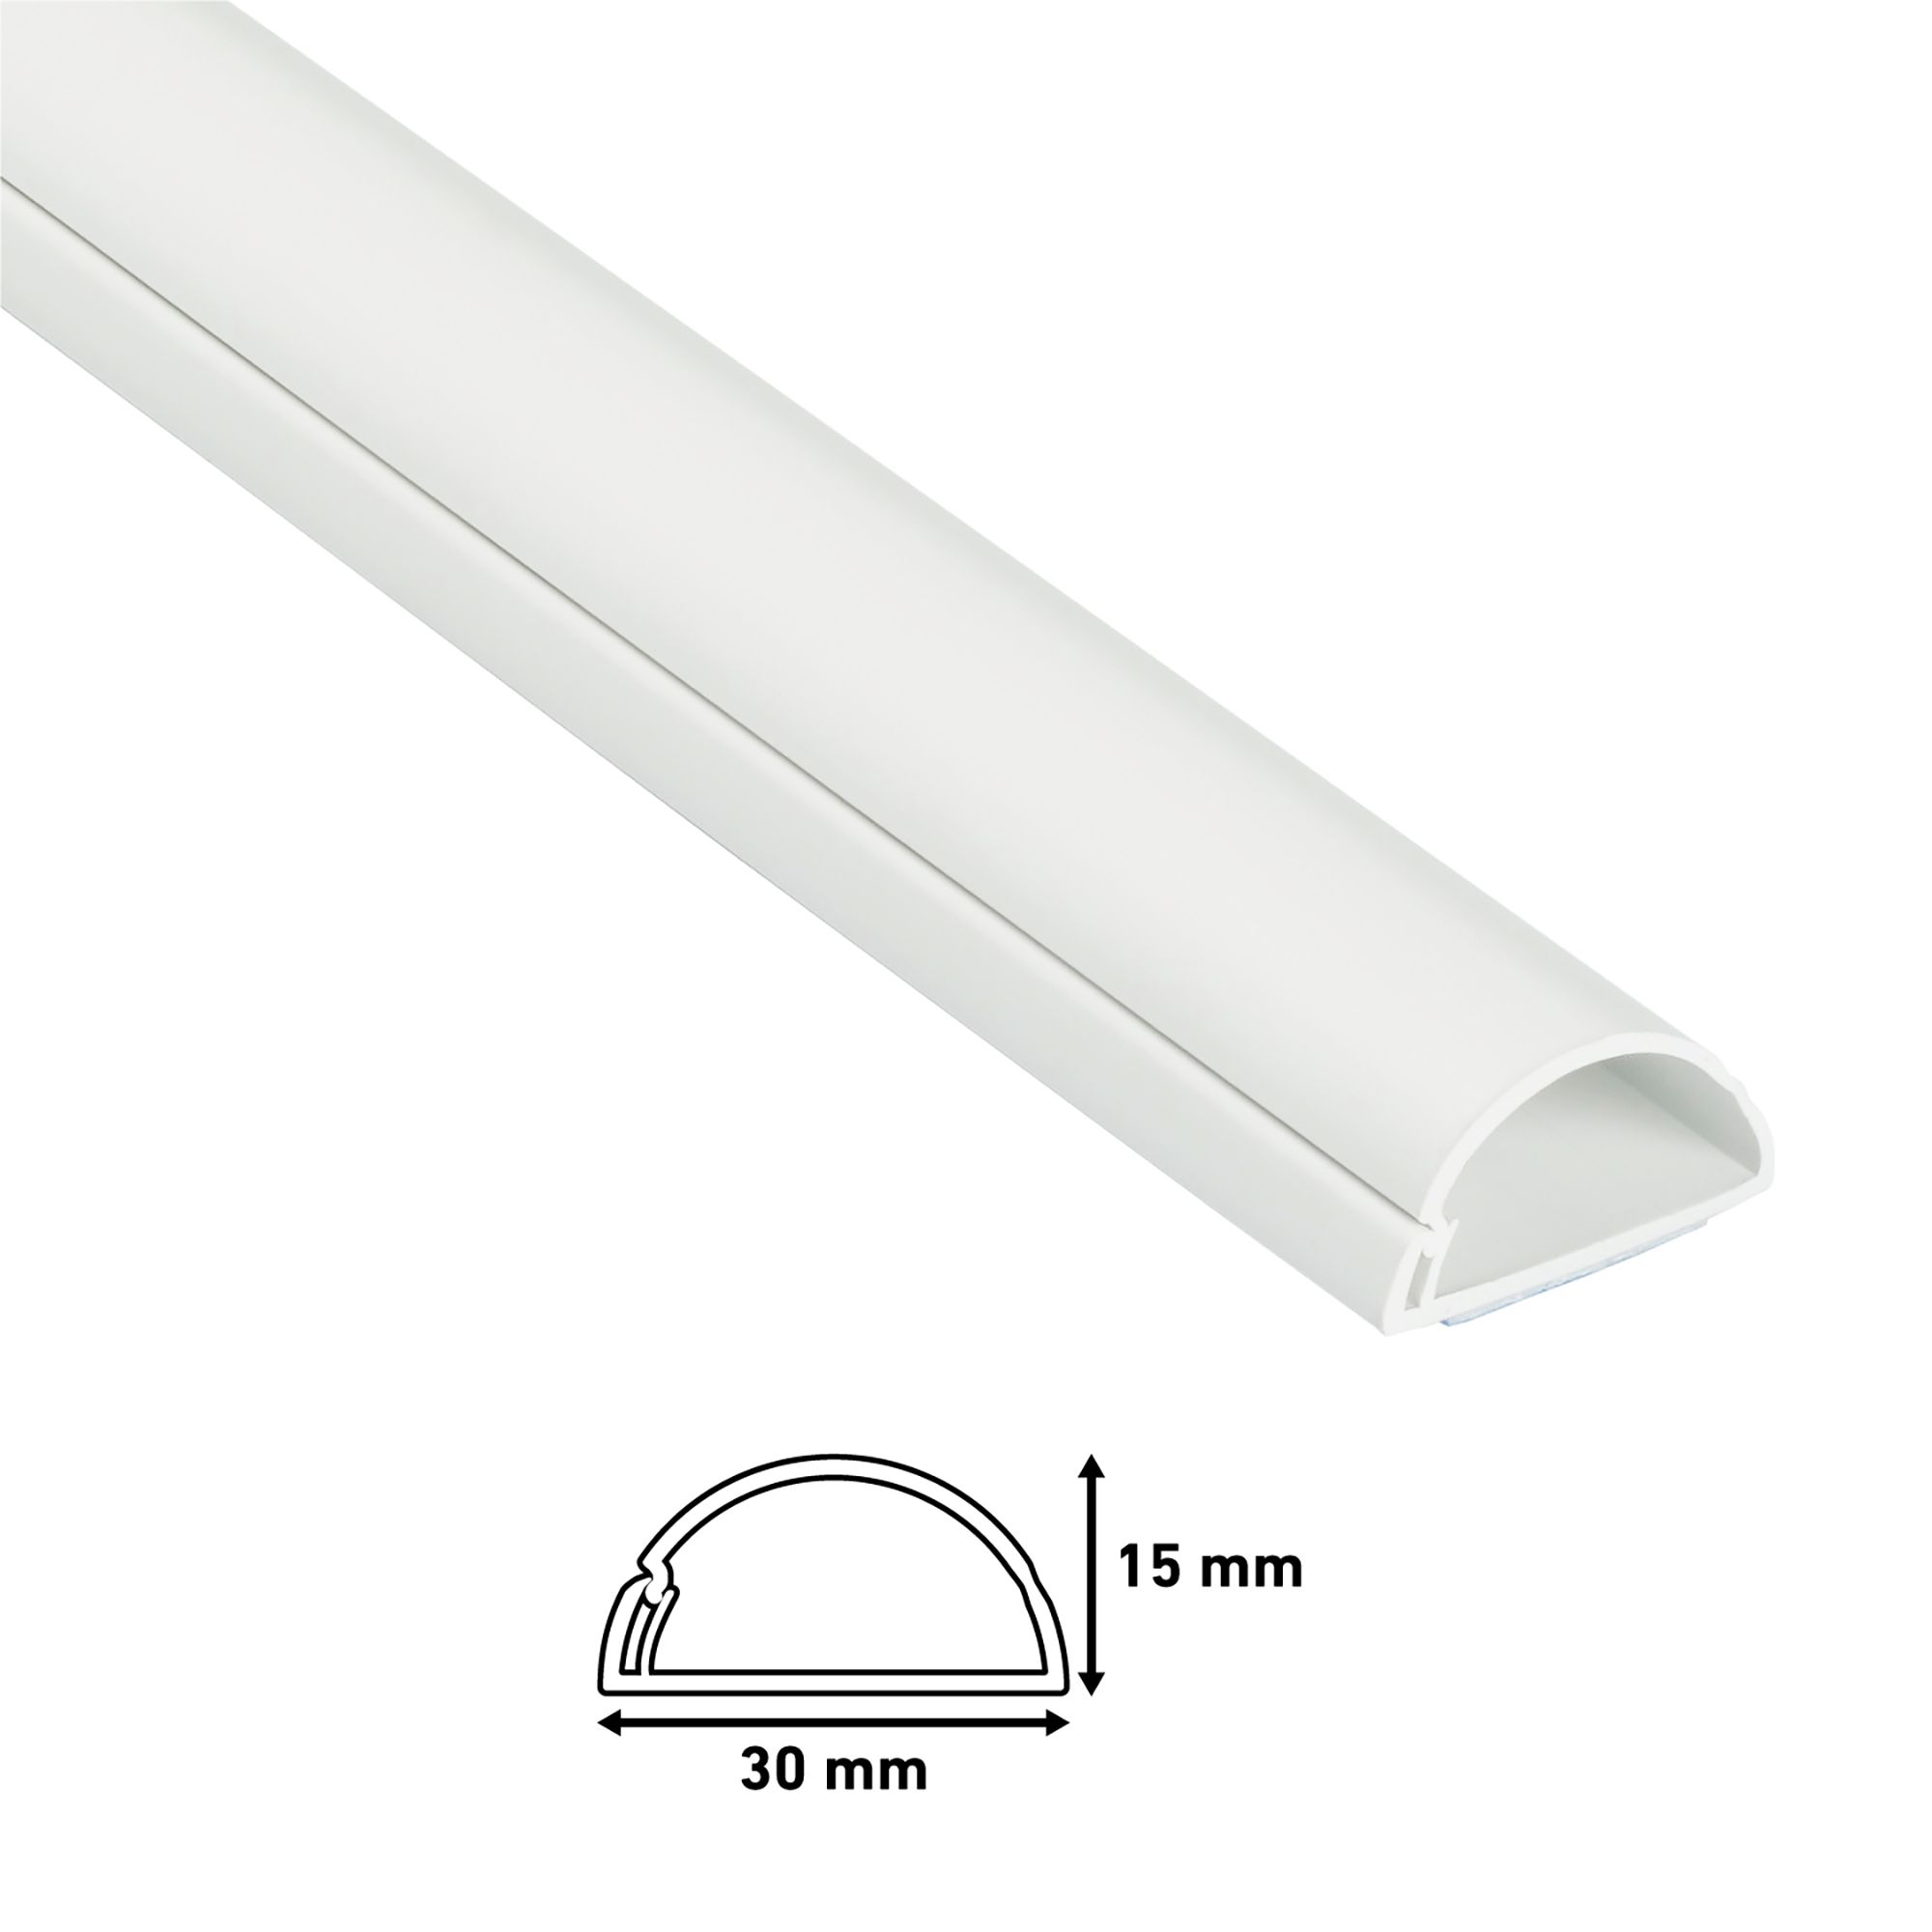 D-Line White Half-round Trunking length, Pack of 3